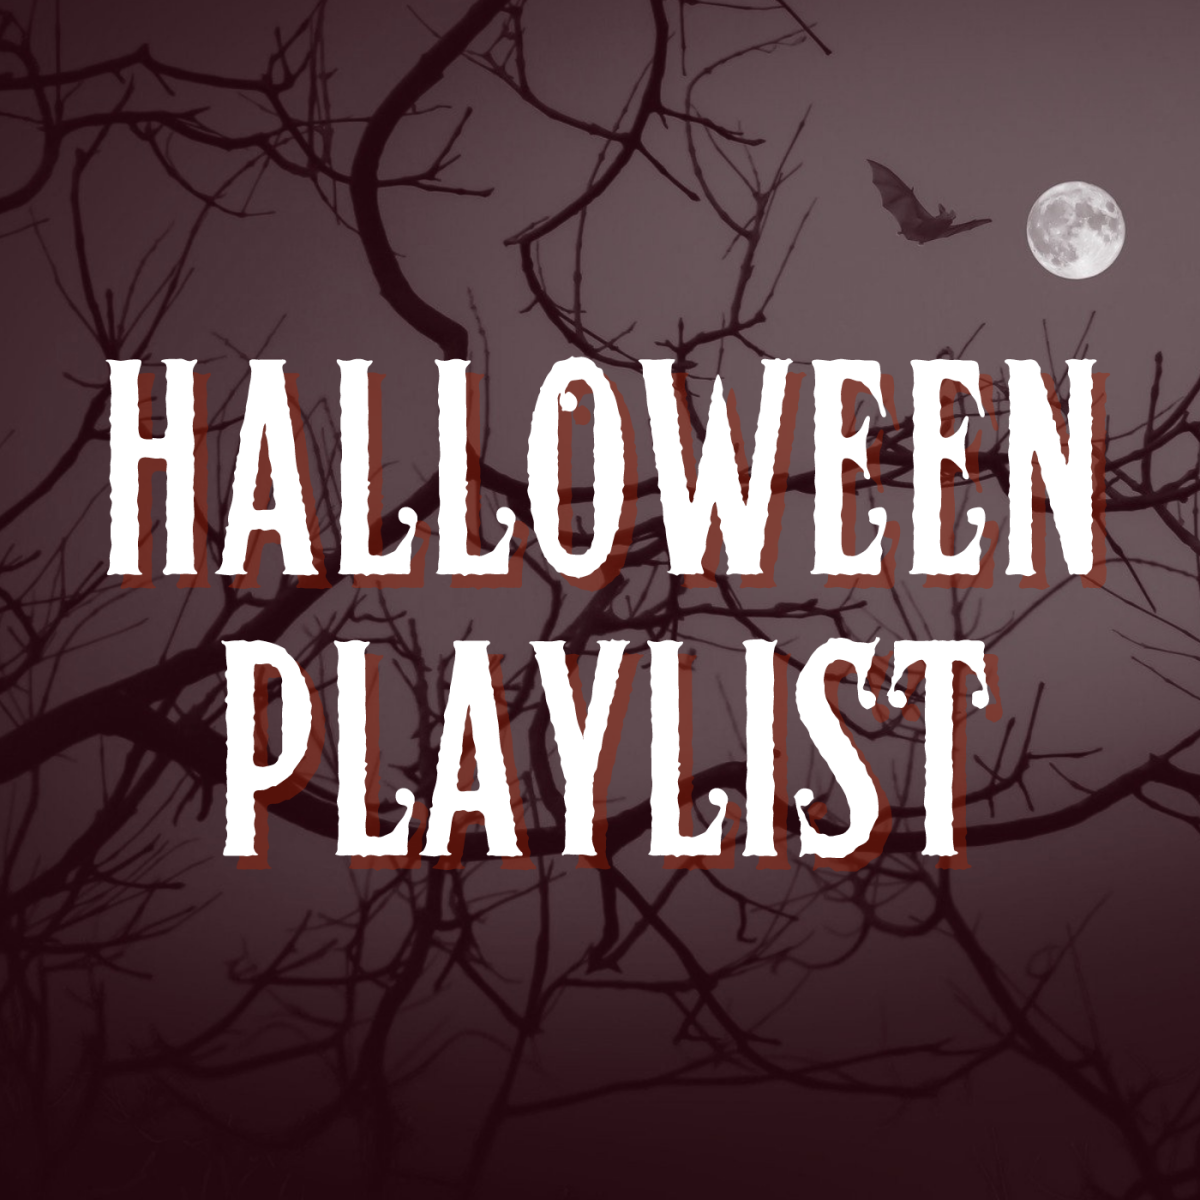 Get a list of the scariest, spookiest tunes to play during your Halloween celebration this year.